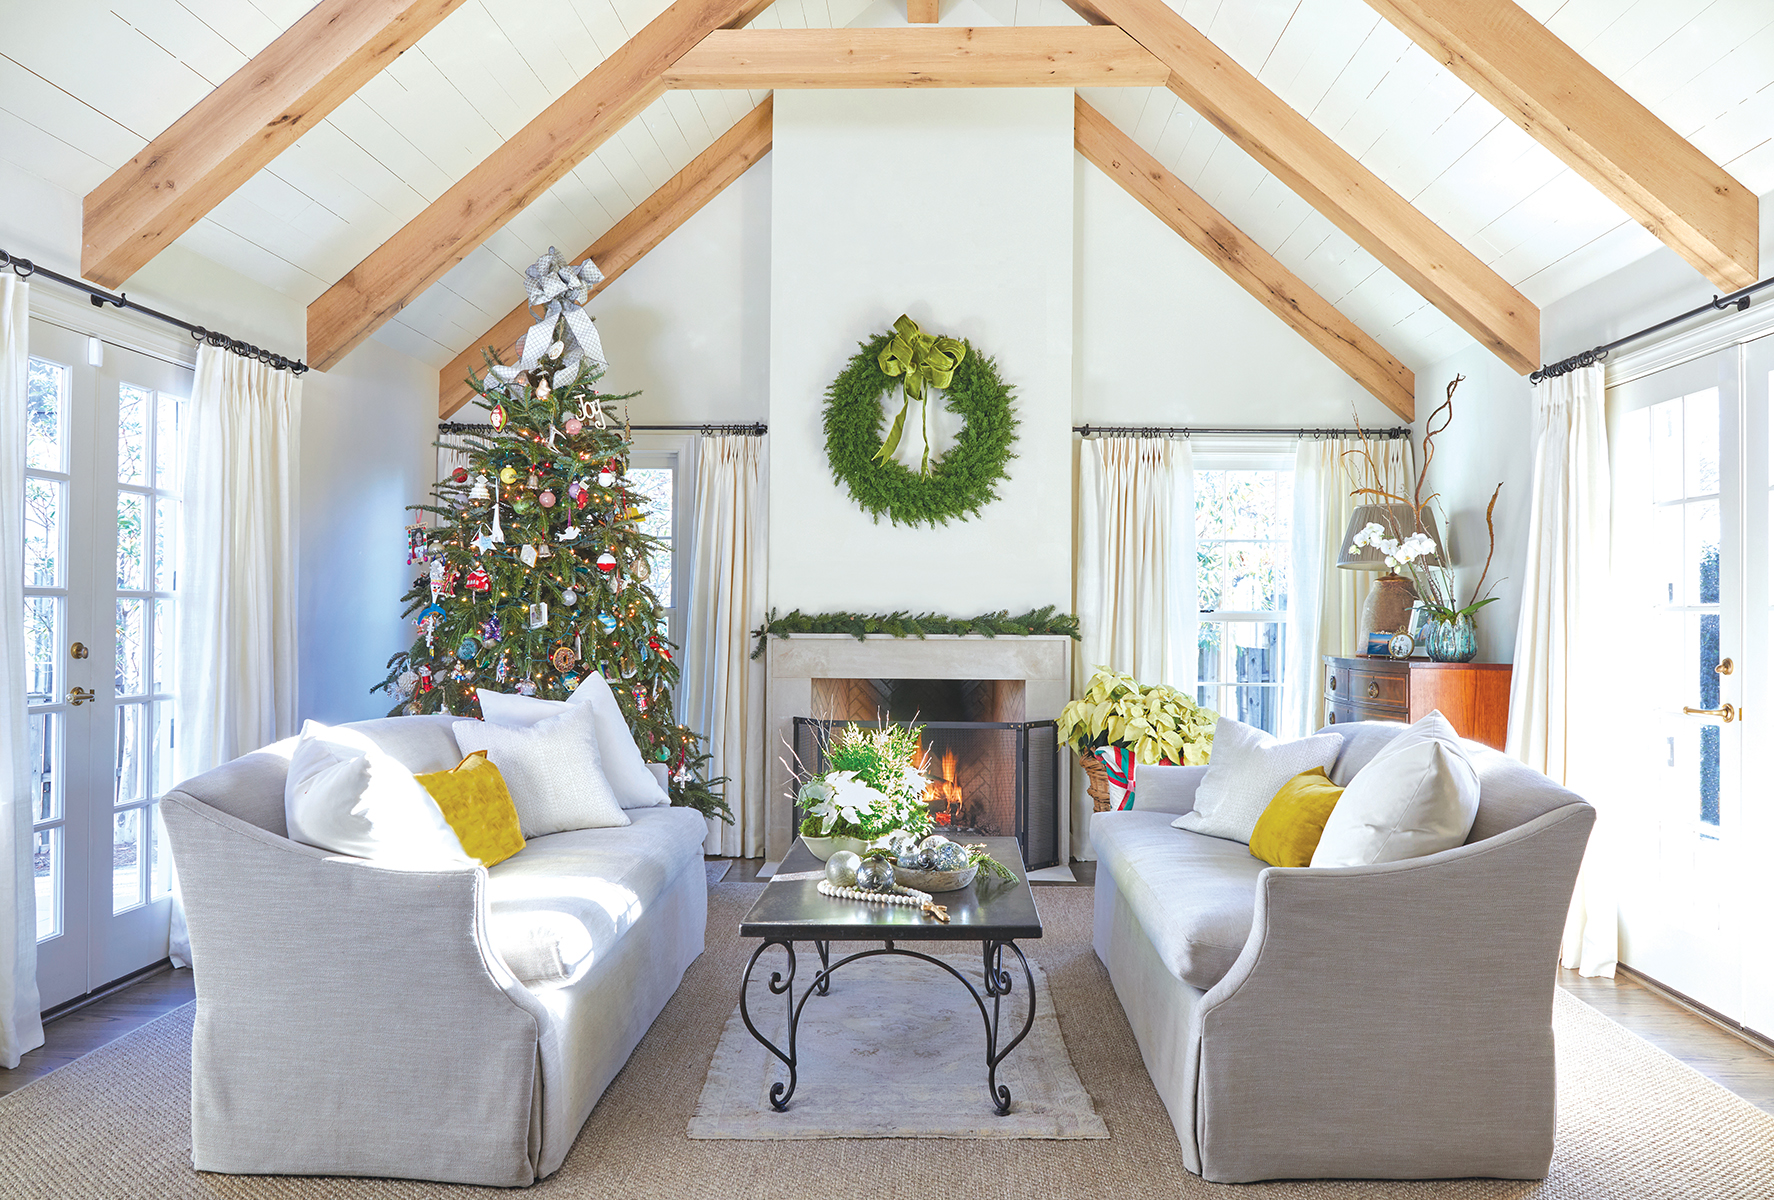 Living room with exposed beams decorated with a large wreath above the fireplace and Christmas tree. 